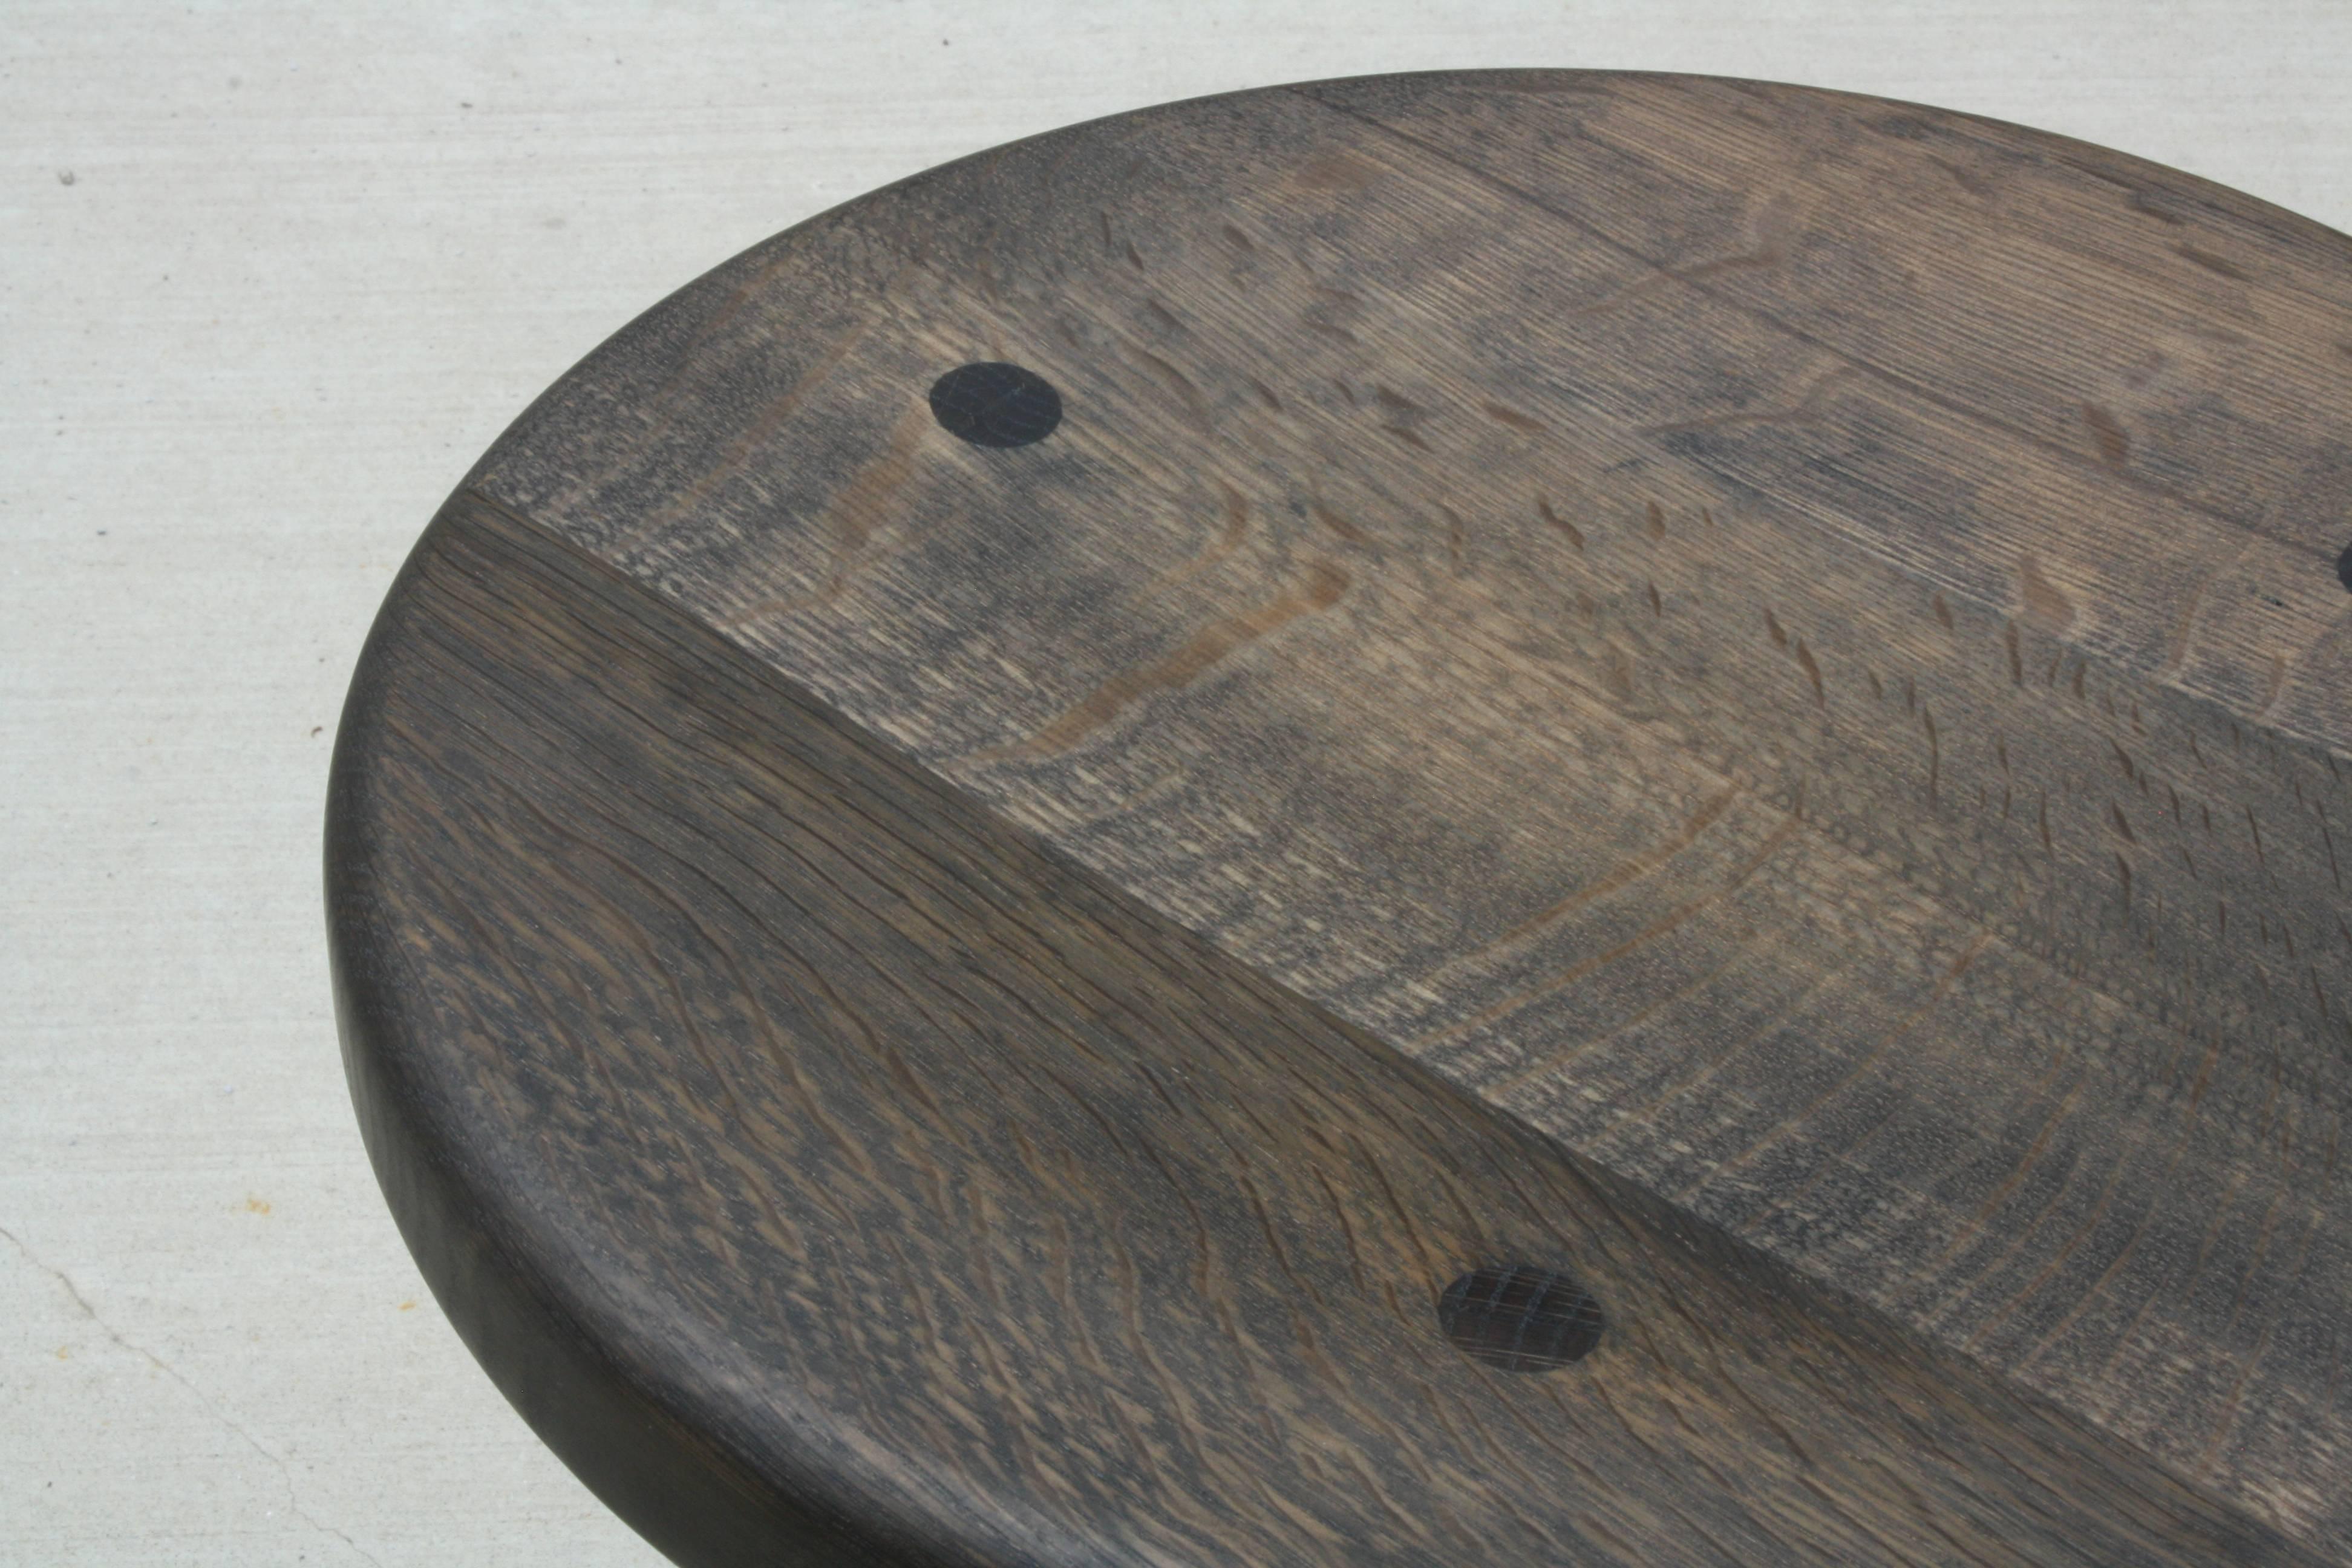 American Saddle, Handmade Oxidized Oak Stool with Textured Legs and a Carved Seat For Sale